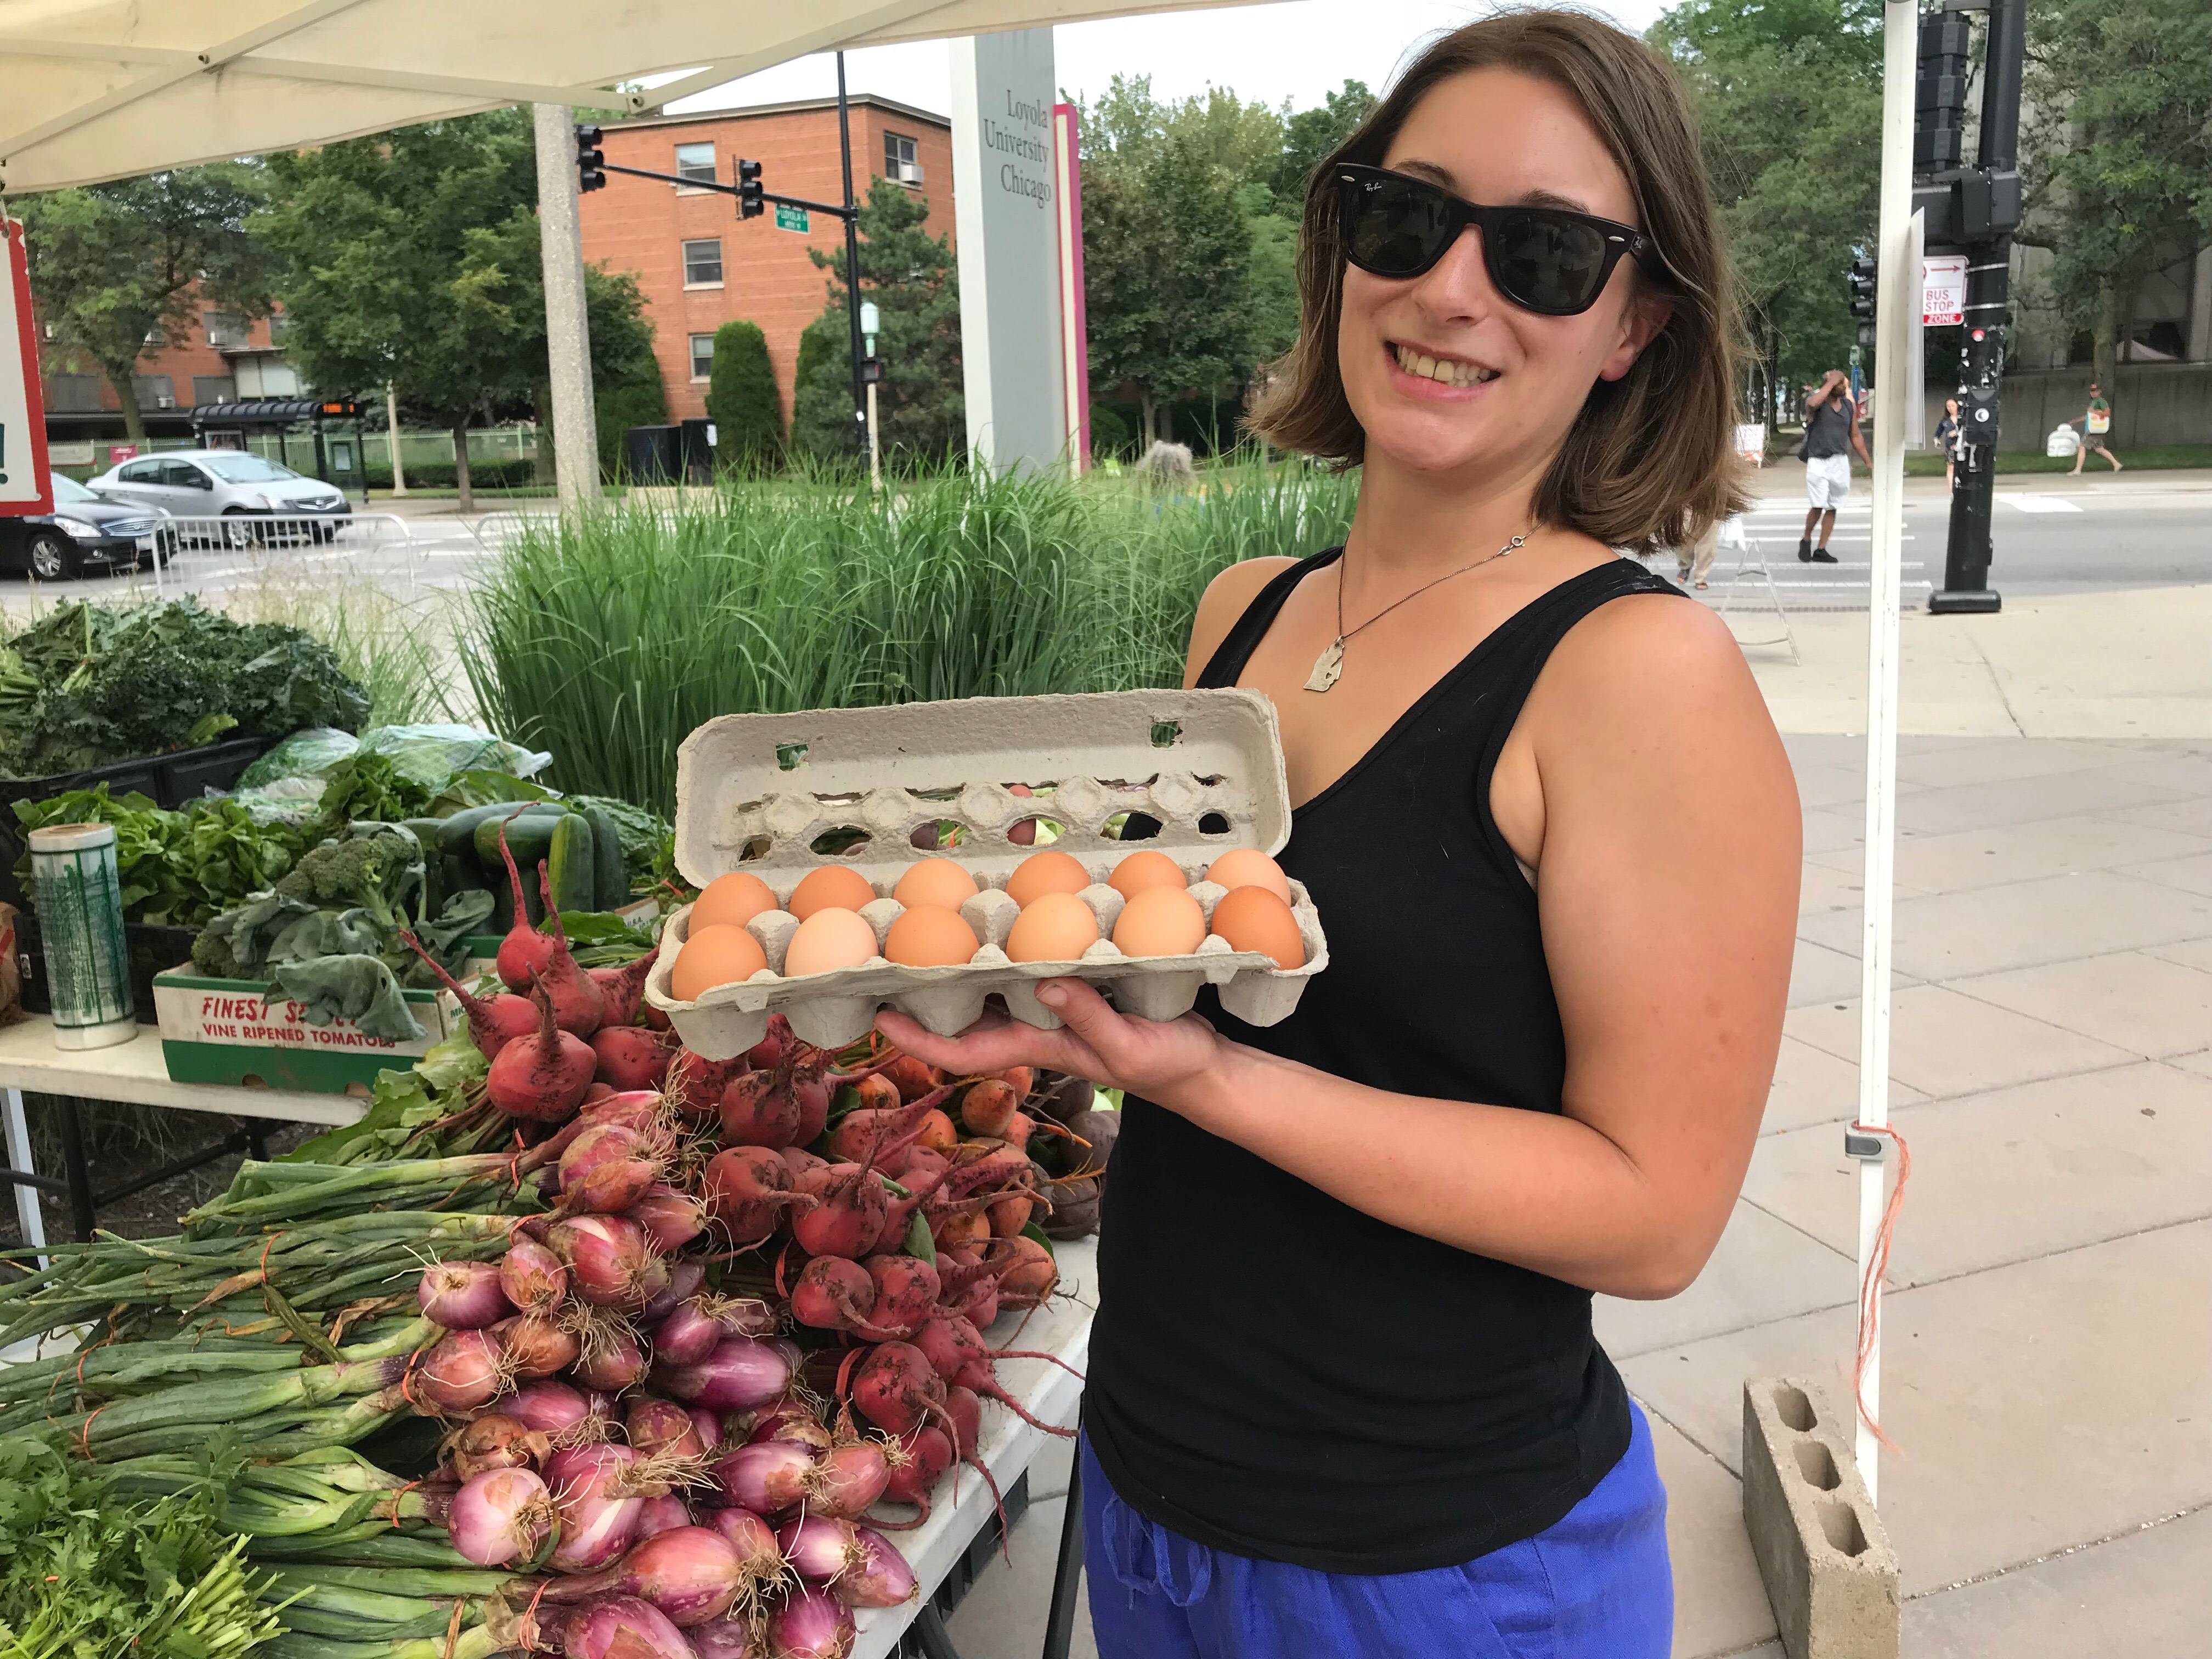 Chelsea Denault proudly shows off her purchase from the farmers market vegetable and egg vendor, John Patyk of Patyk Farms.